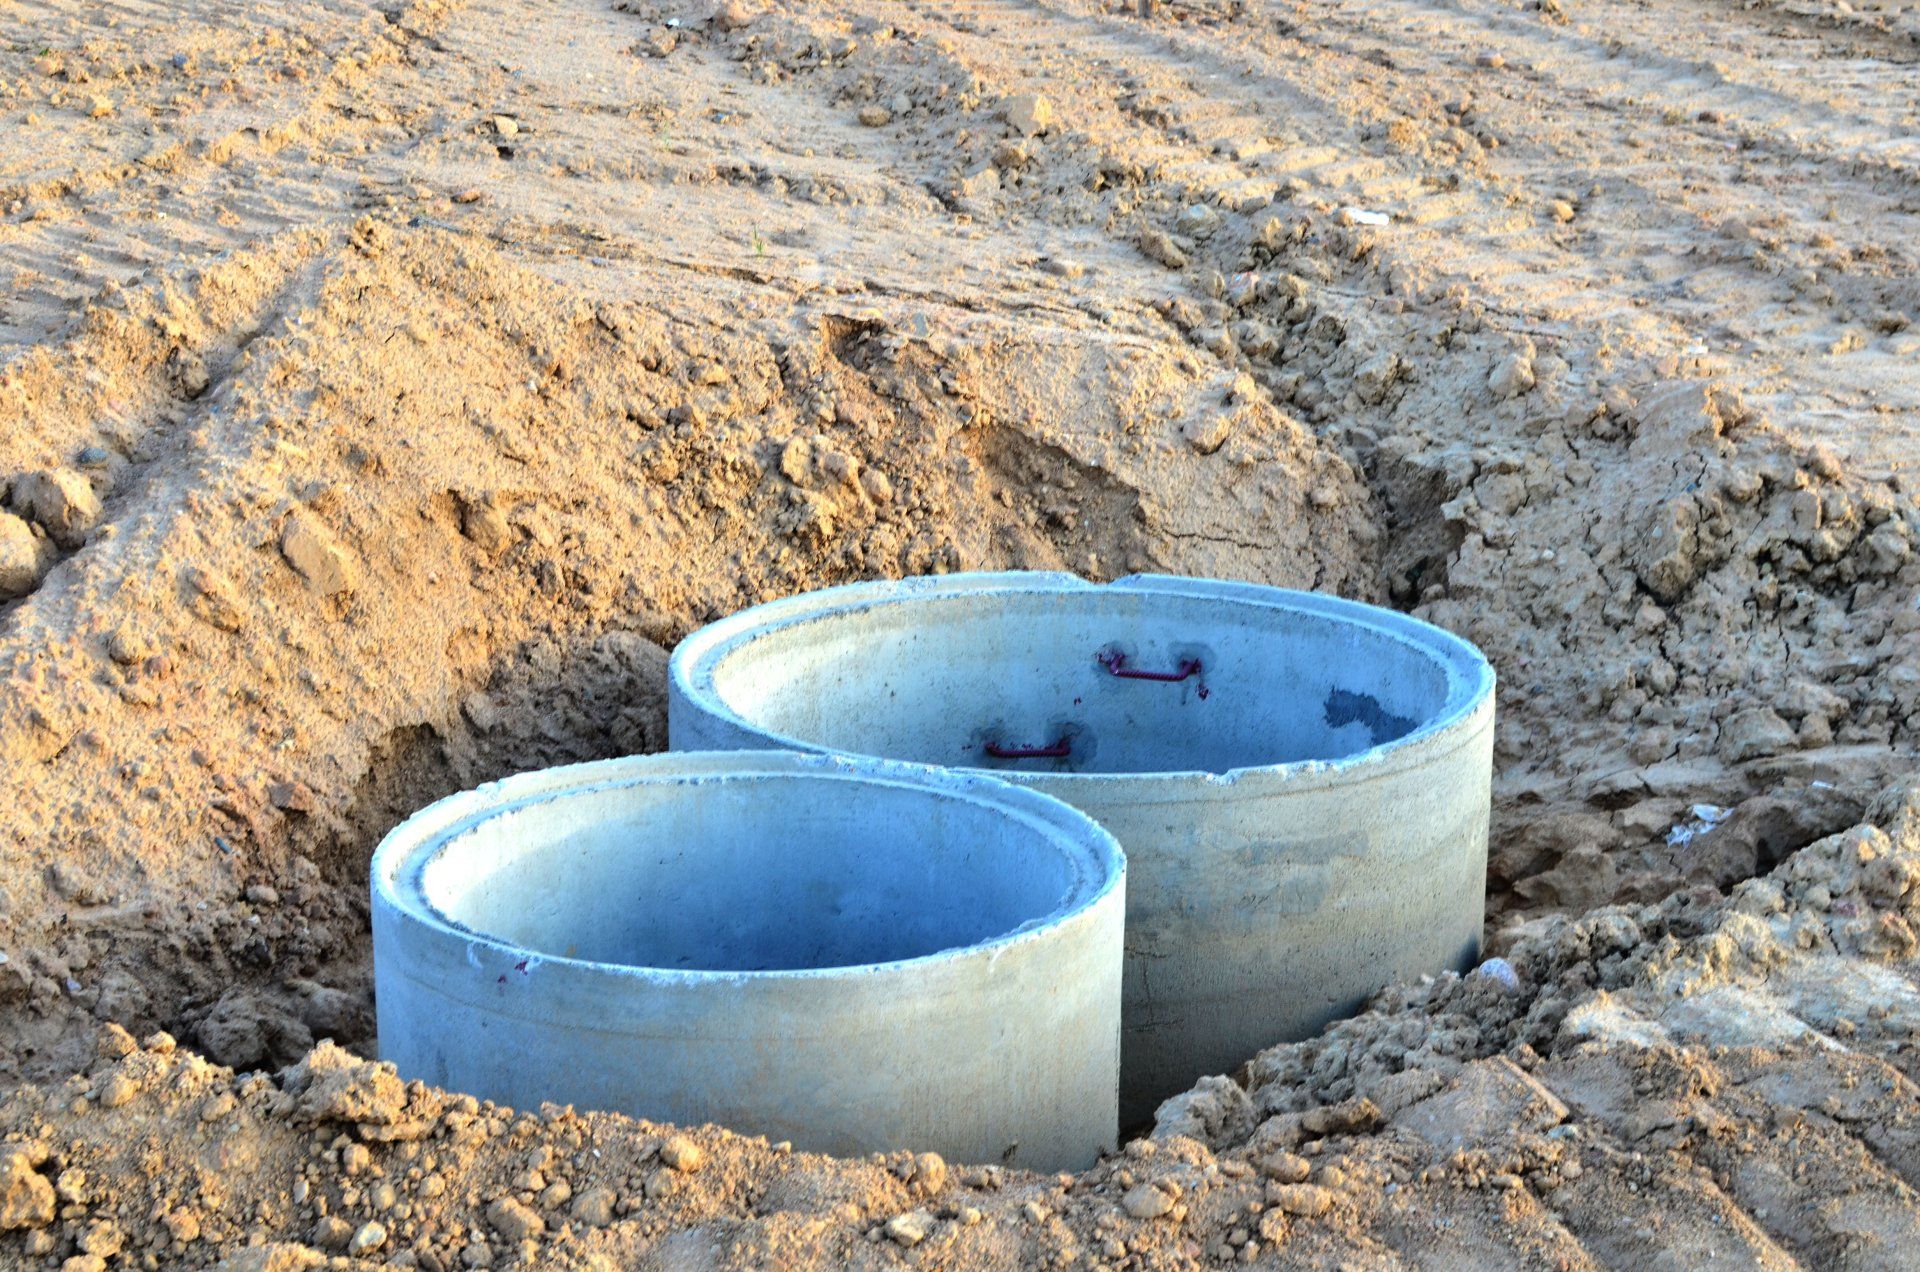 Installation of concrete sewer wells in the ground at the construction site